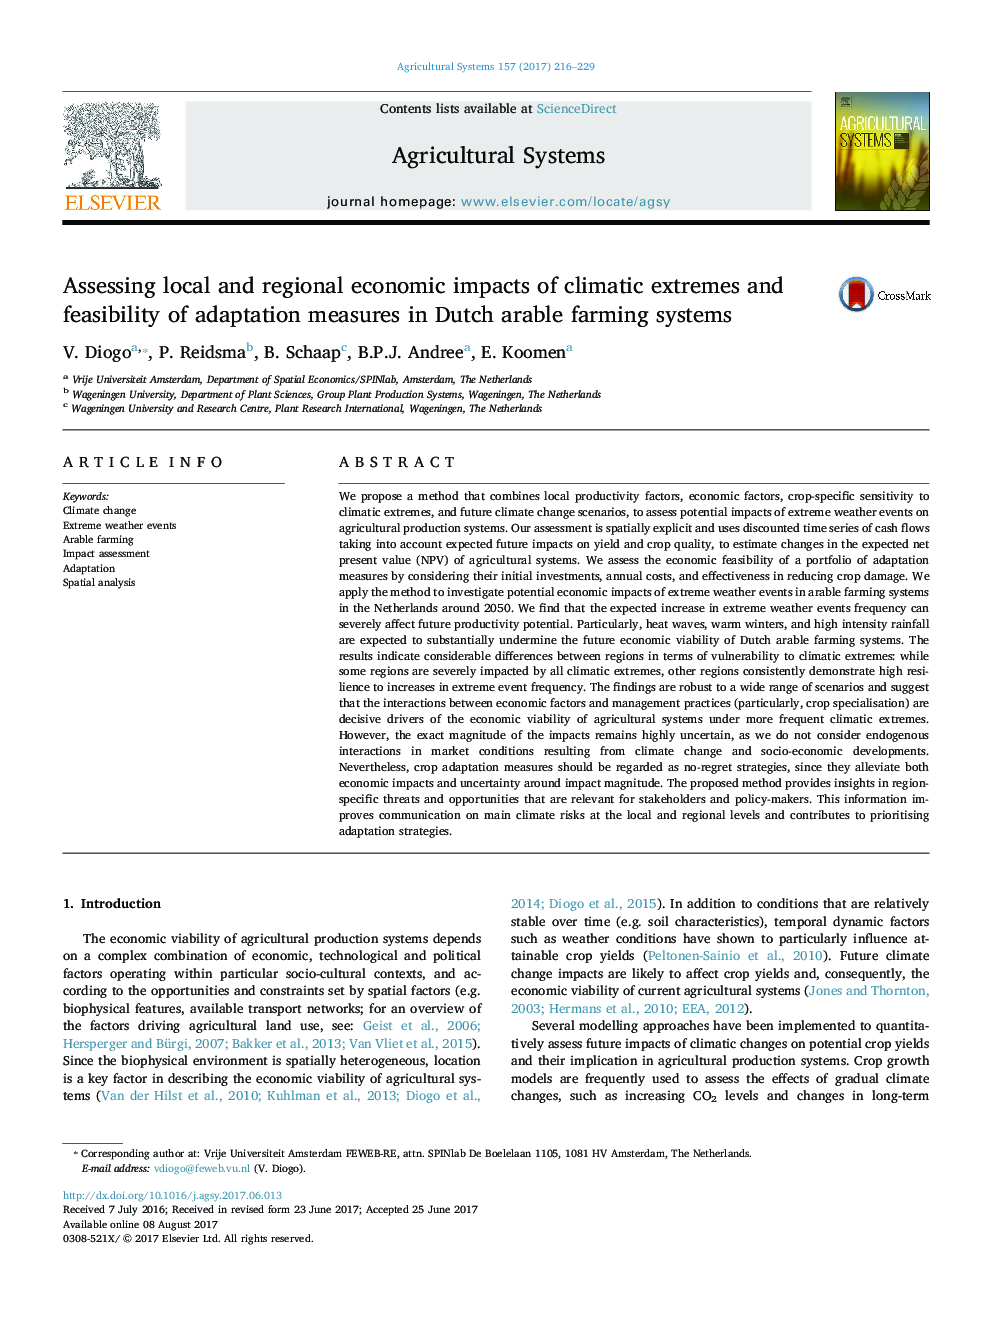 Assessing local and regional economic impacts of climatic extremes and feasibility of adaptation measures in Dutch arable farming systems